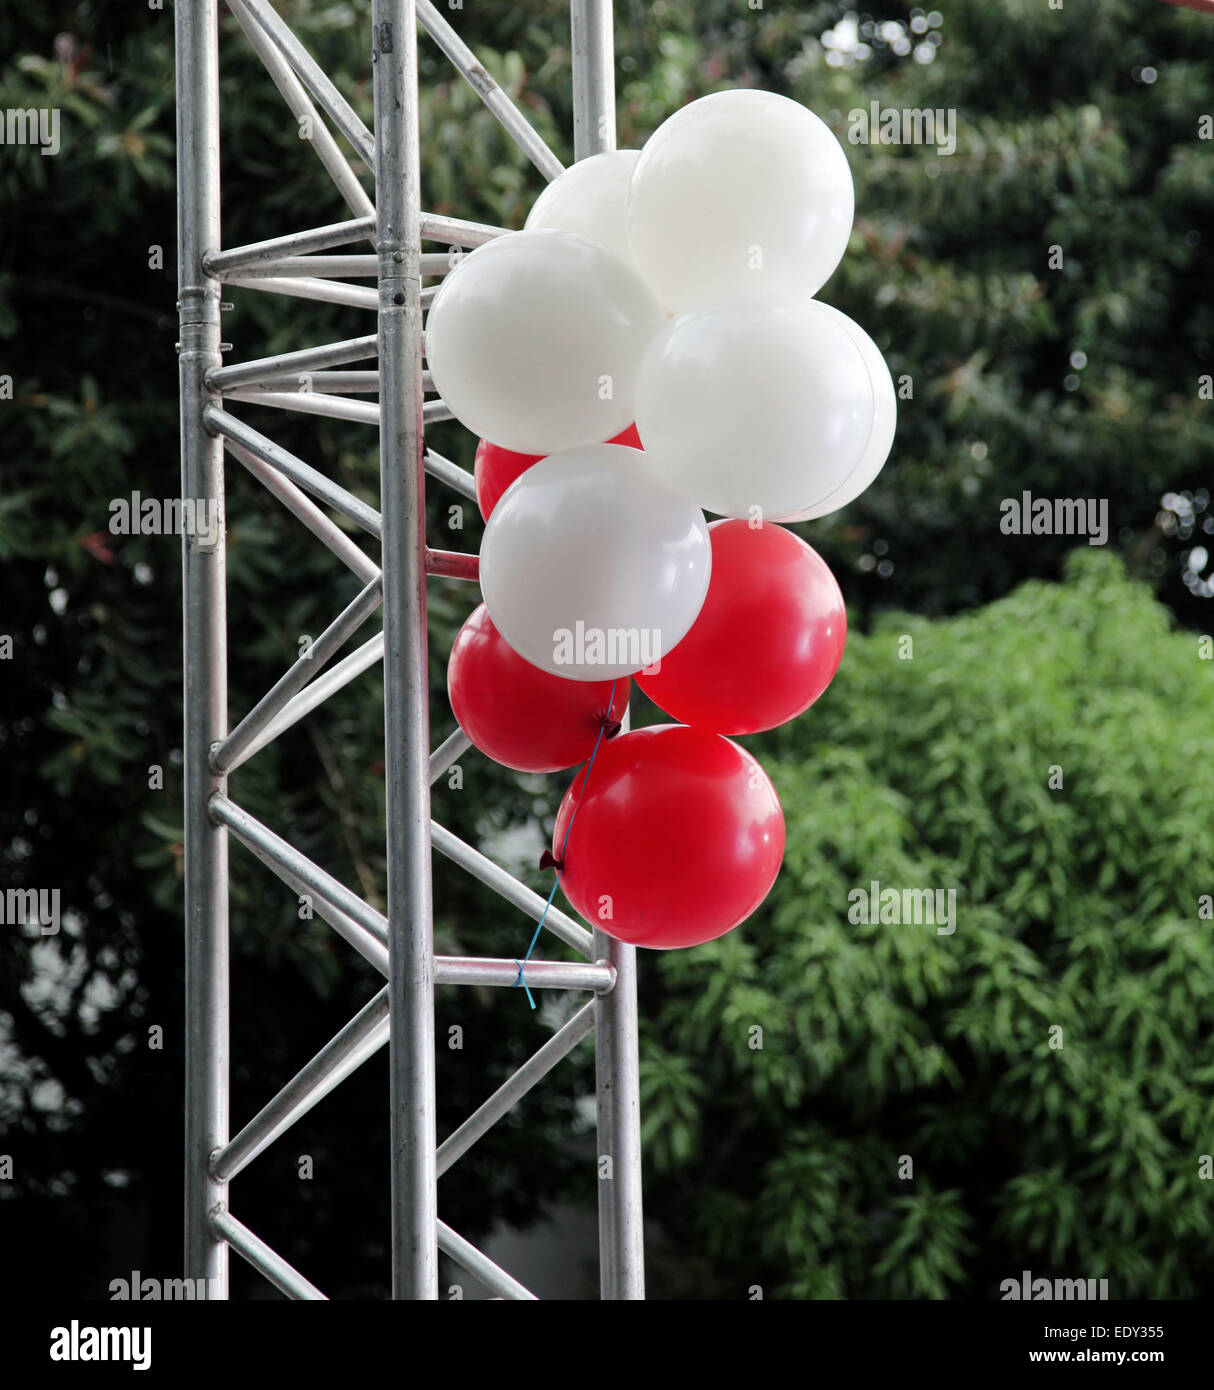 White and red Balloons attached together to a pillar structure